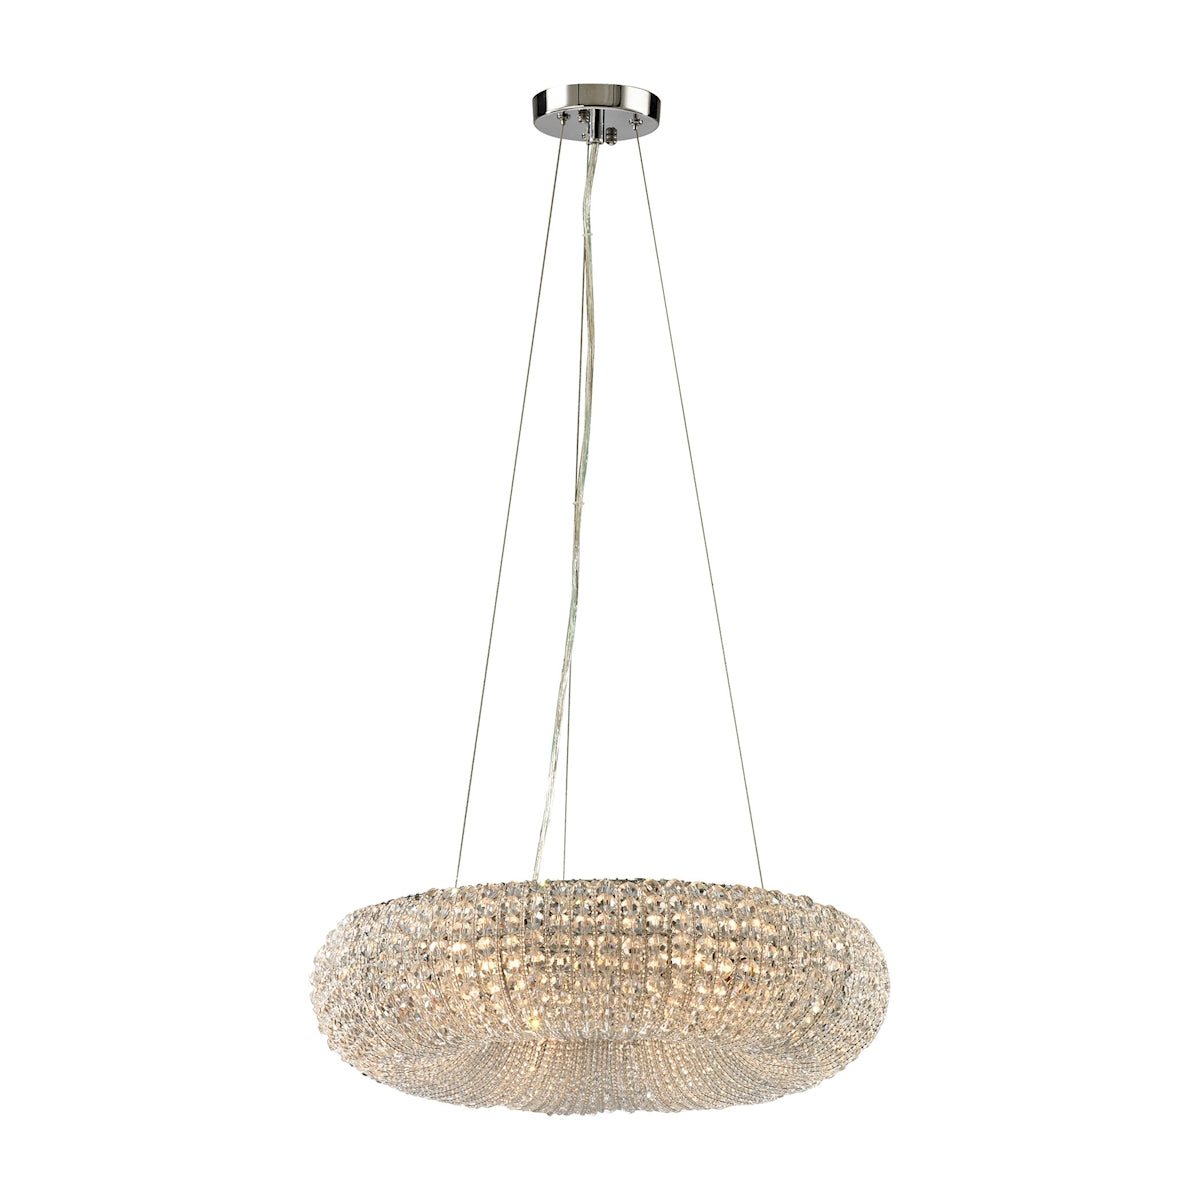 ELK Lighting 45291/6 Crystal Ring 6-Light Chandelier in Chrome with Clear Crystal Beads